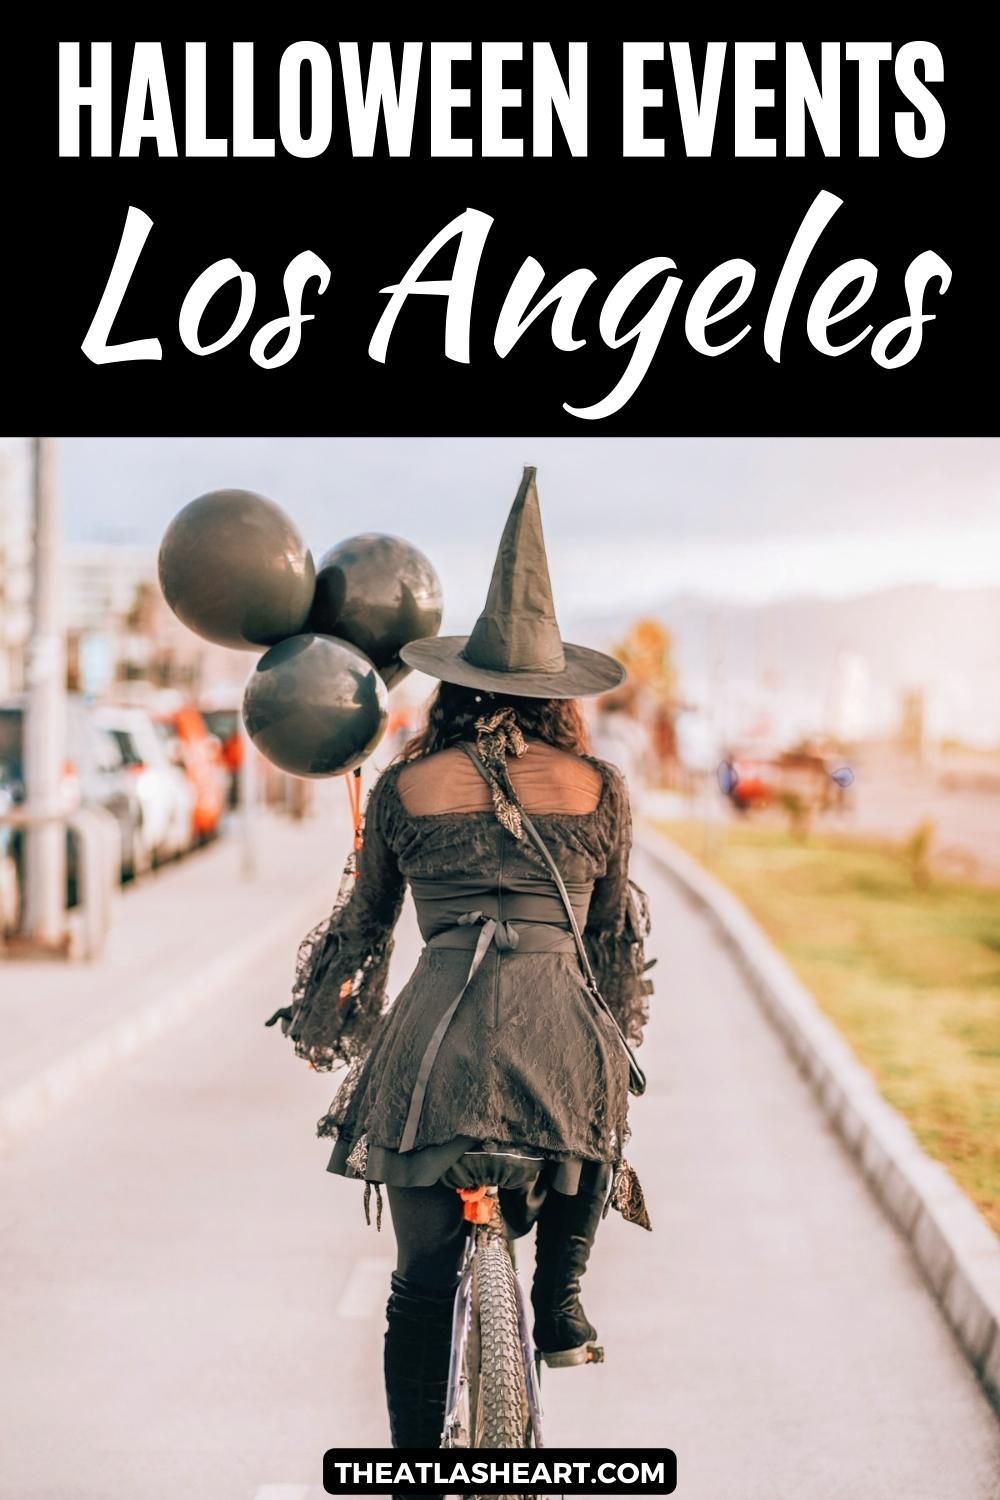 27 BEST Halloween Events in Los Angeles for Adults & Families